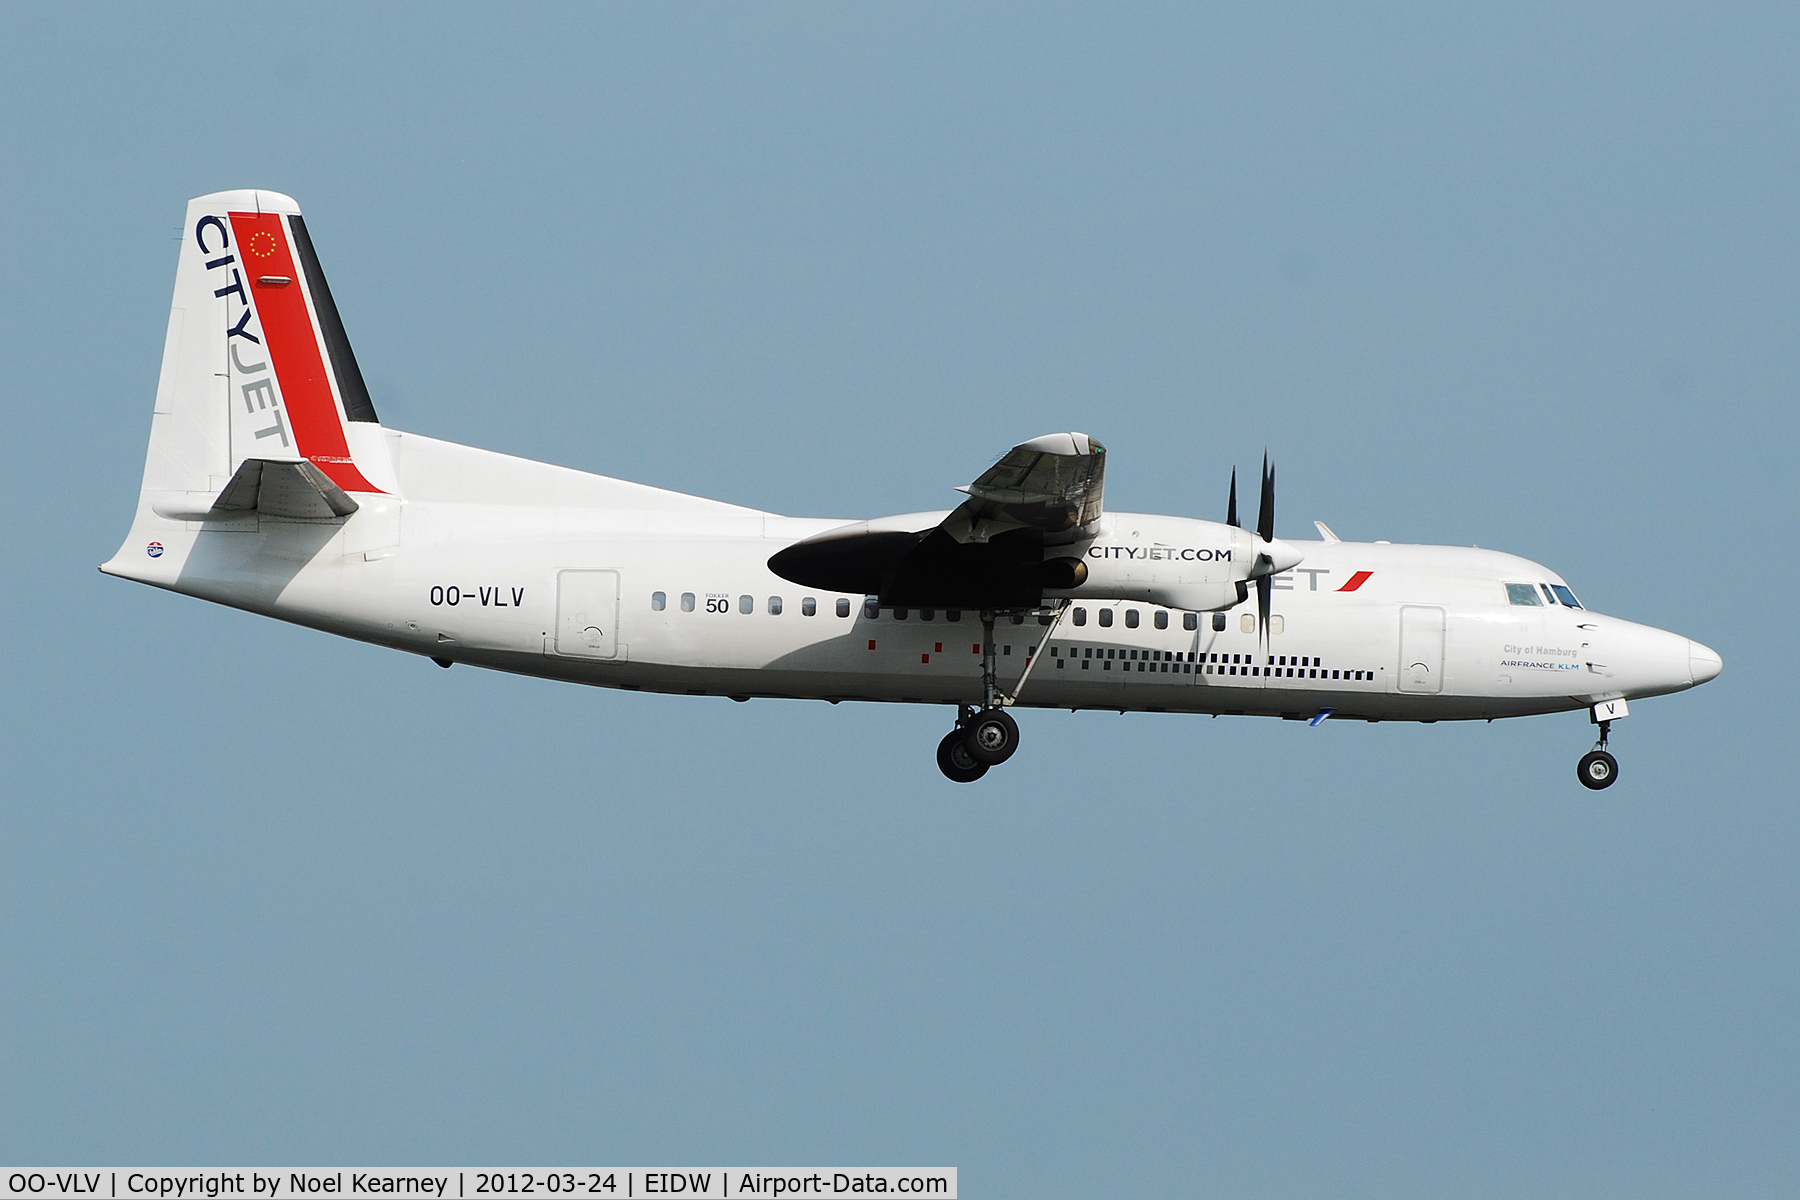 OO-VLV, 1989 Fokker 50 C/N 20160, Seen about to land on Rwy 10 operating flight BCY 947.